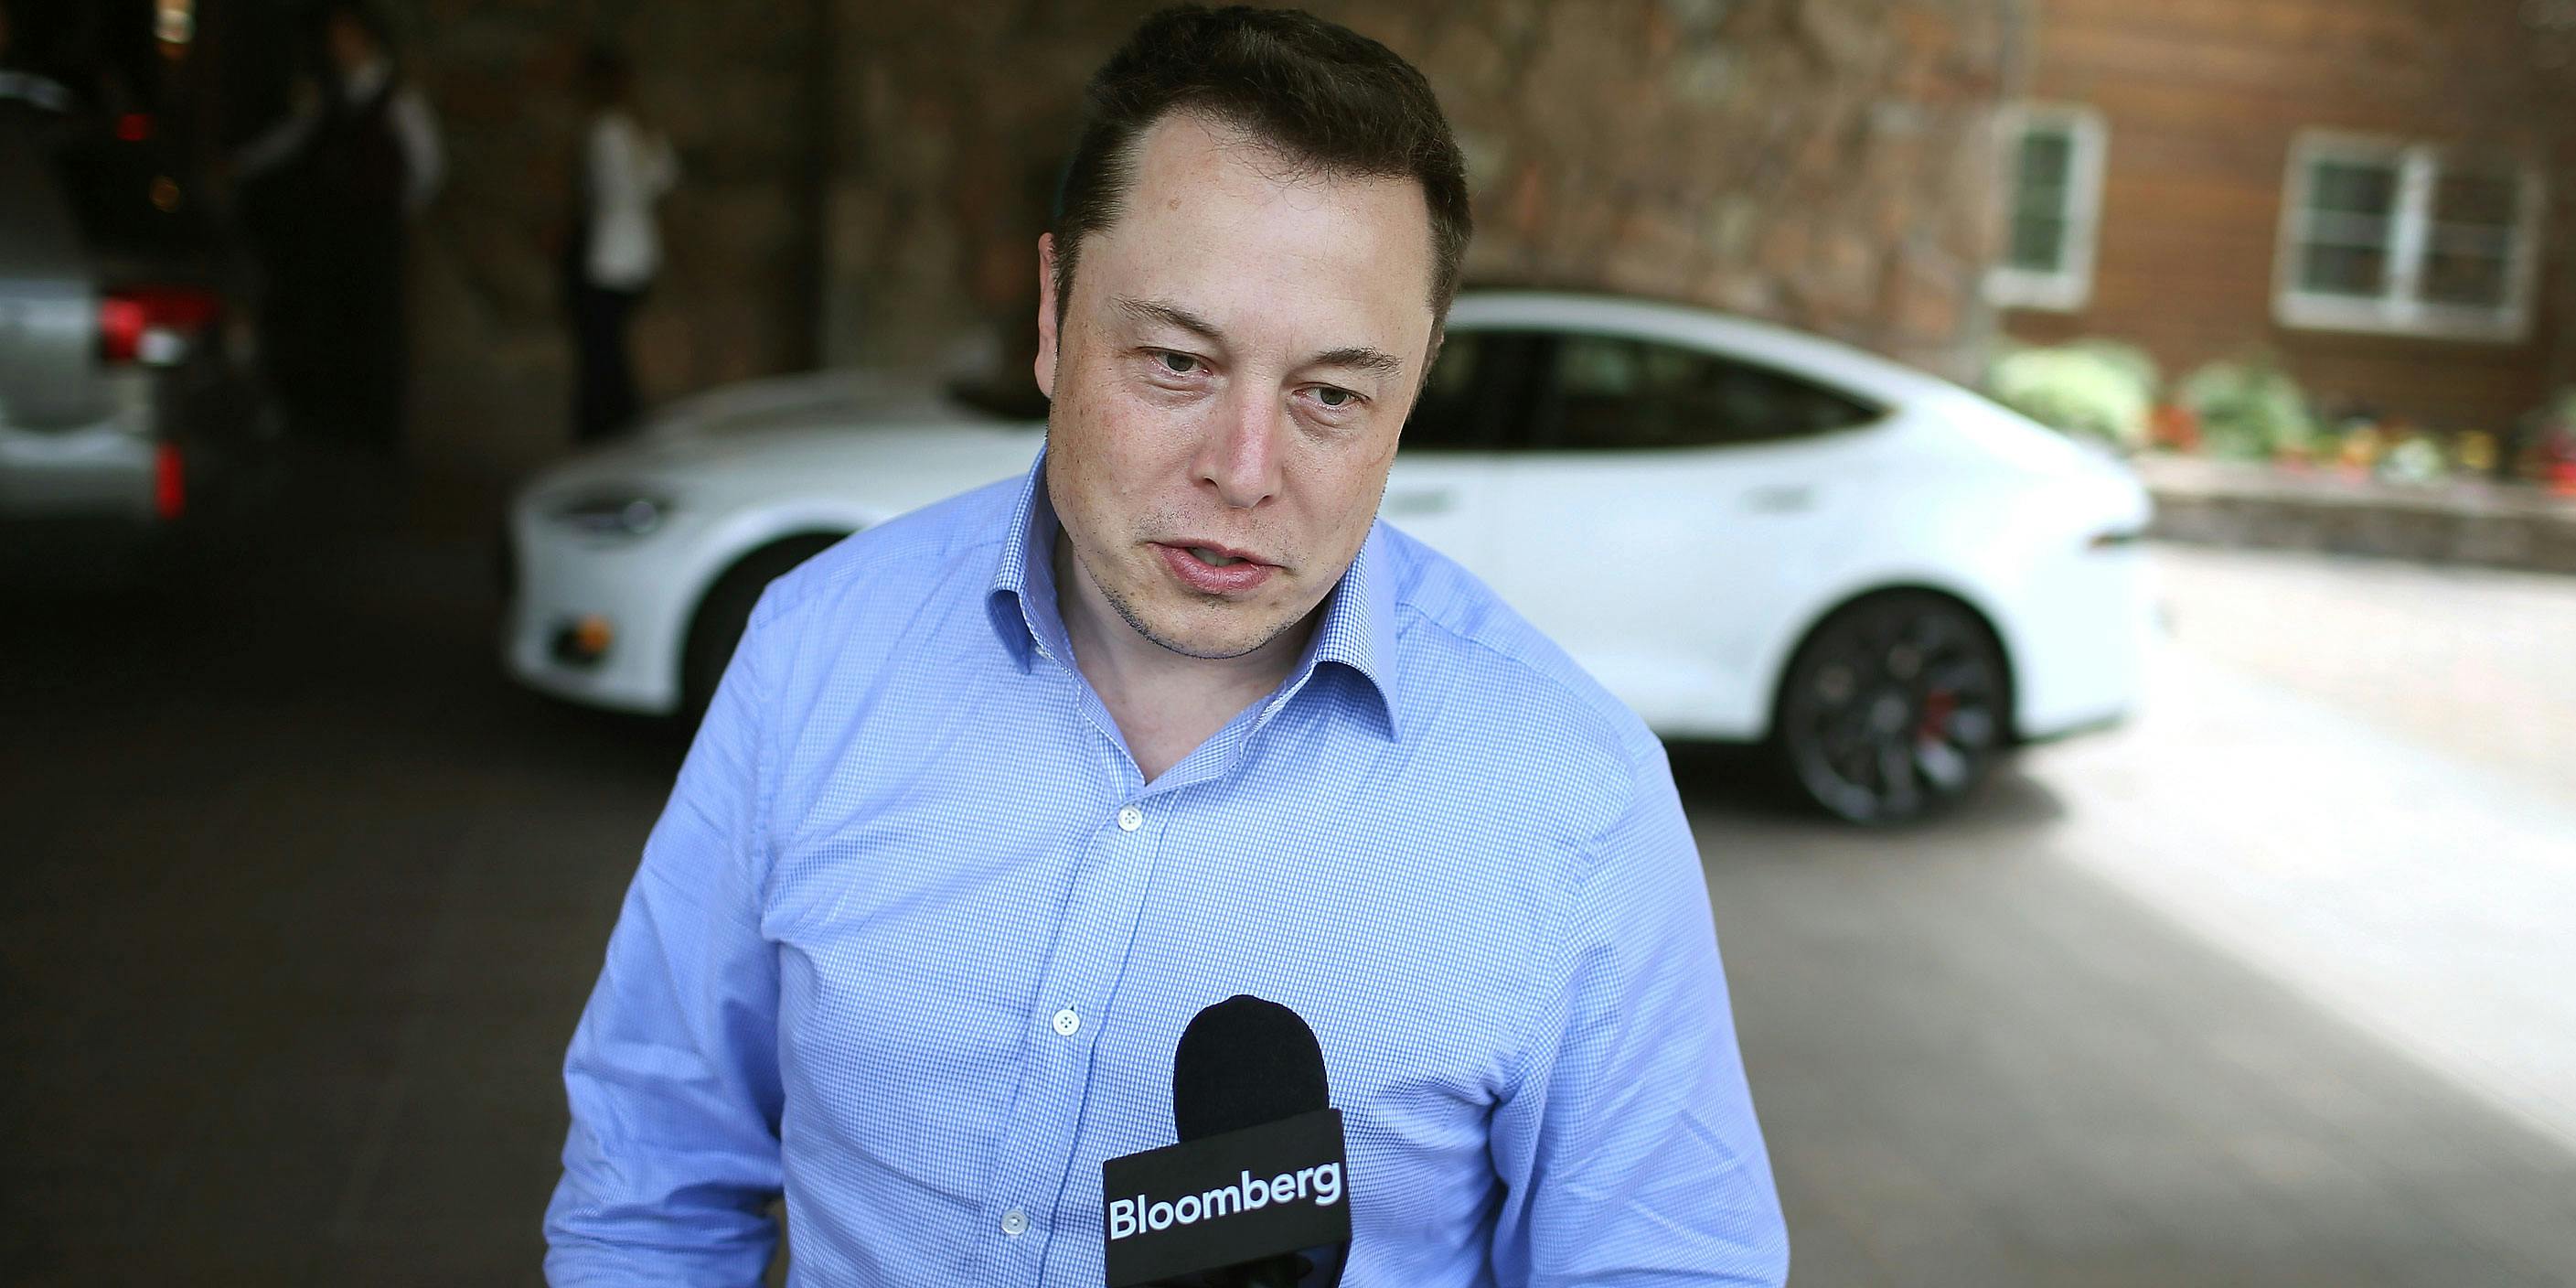 Elon Musk, CEO and CTO of SpaceX, CEO and product architect of Tesla Motors, and chairman of SolarCity, attends the Allen & Company Sun Valley Conference on July 7, 2015 in Sun Valley, Idaho. Recently, Elon Musk’s weed joke sent investors into a panic. (Photo by Scott Olson/Getty Images)